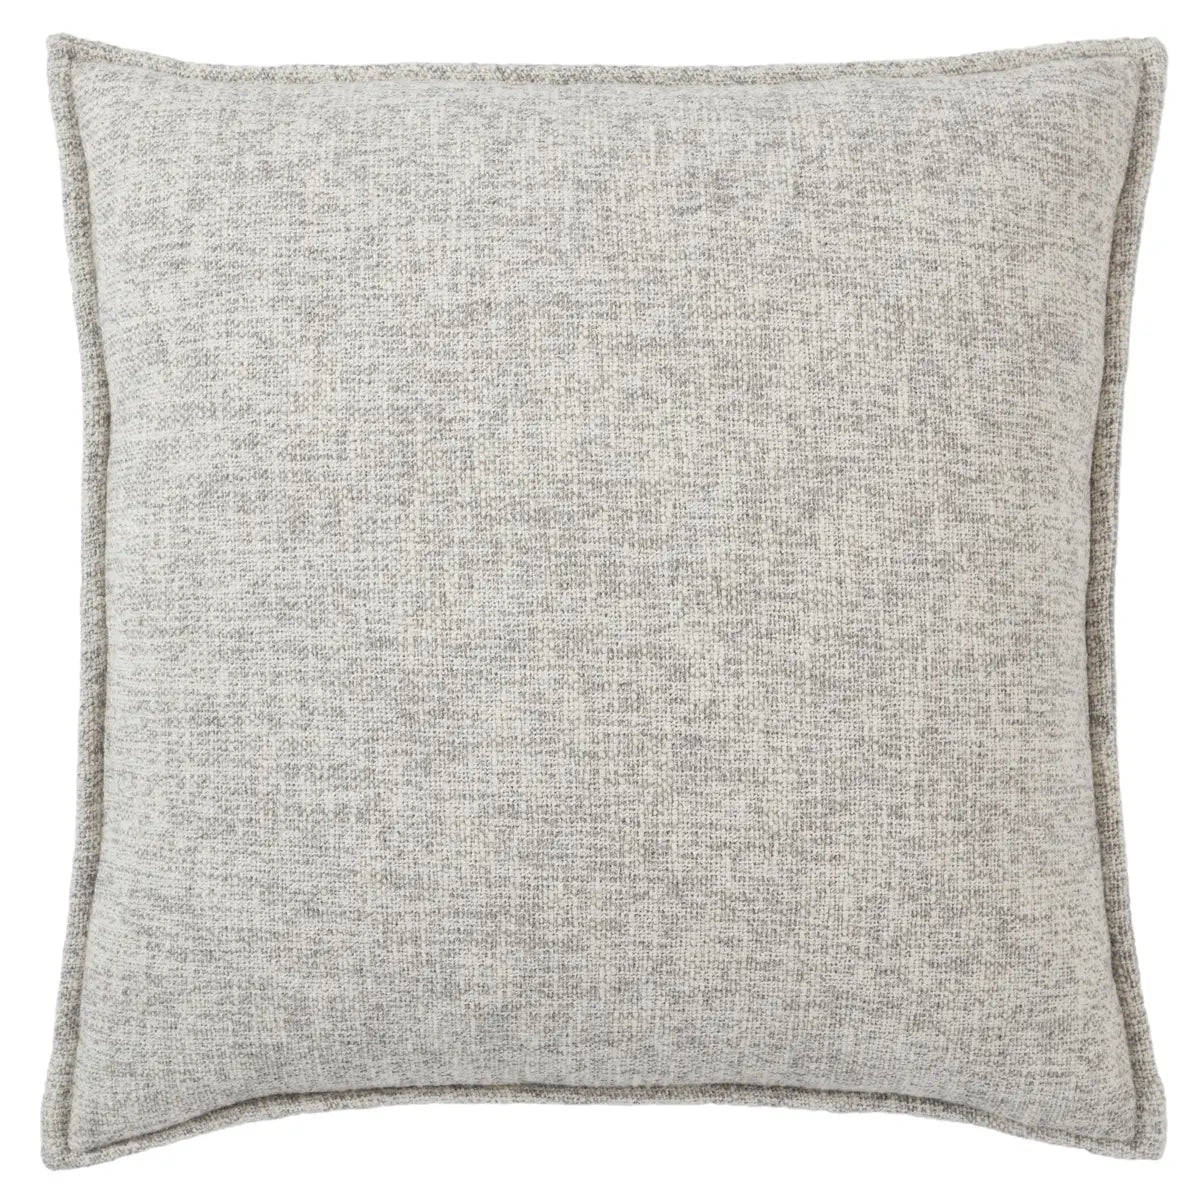 Tanzy Pillow - Silver and Cream